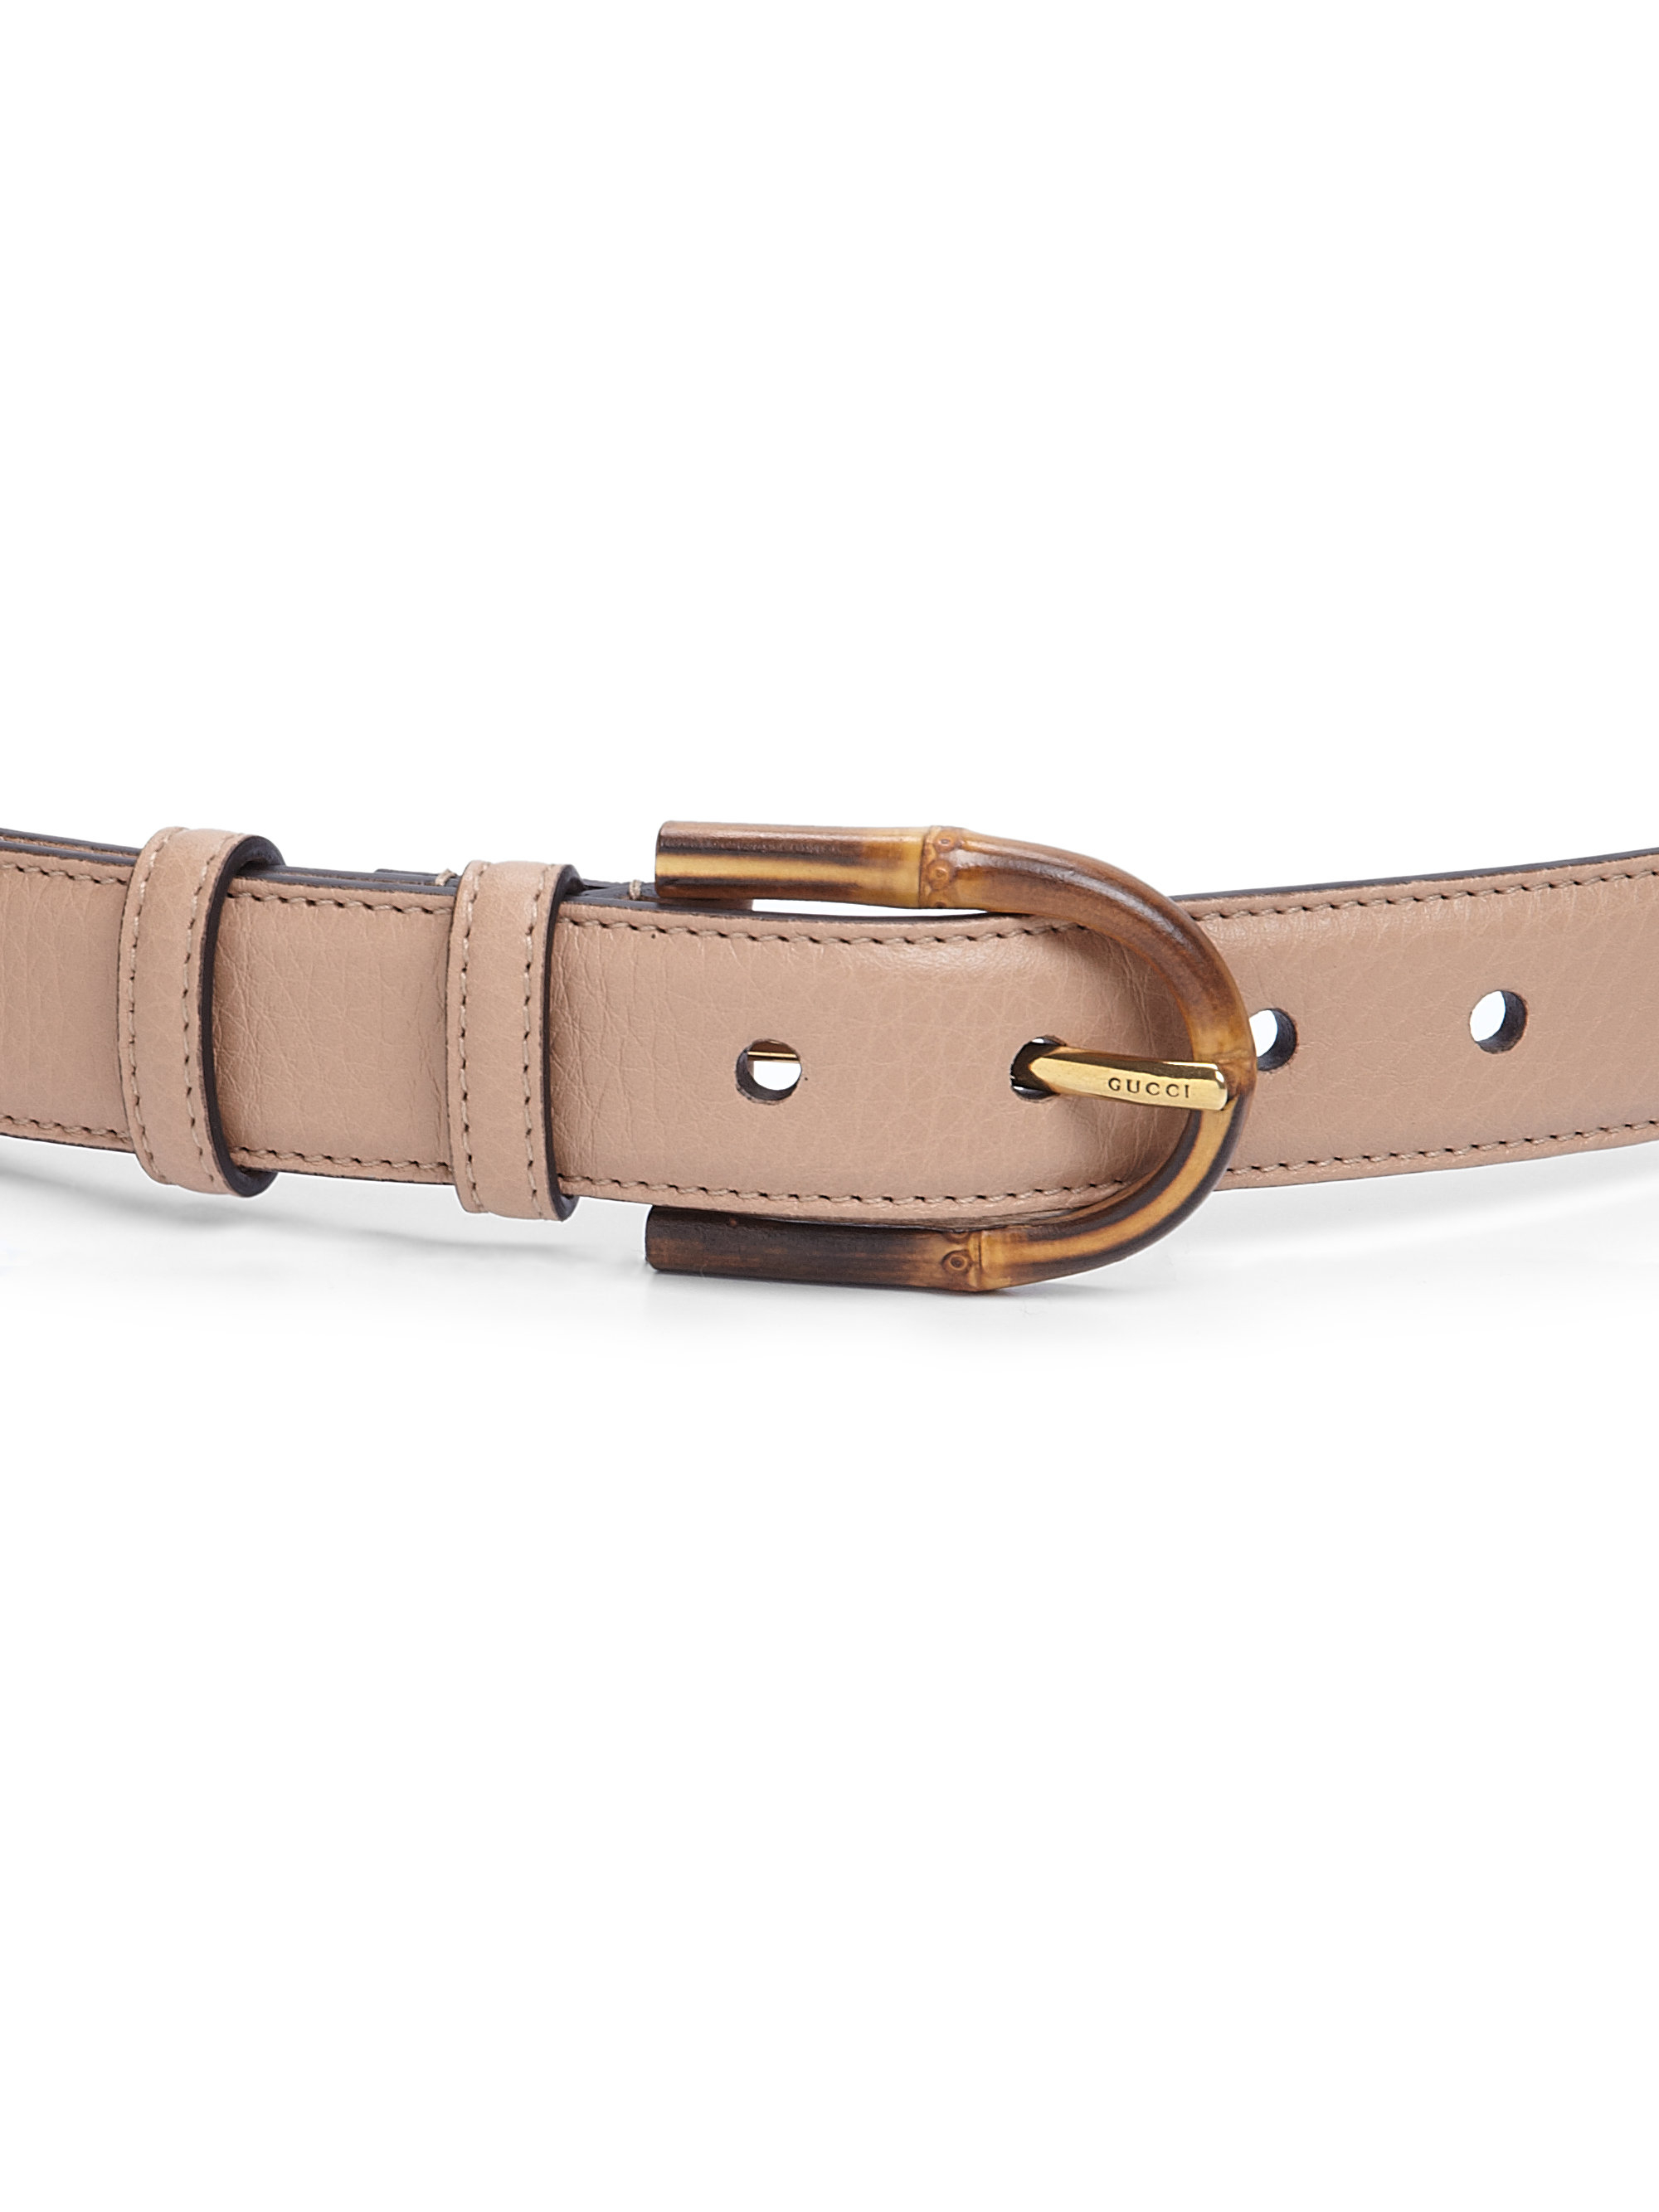 Lyst - Gucci Bamboo Buckle Leather Belt in Natural for Men